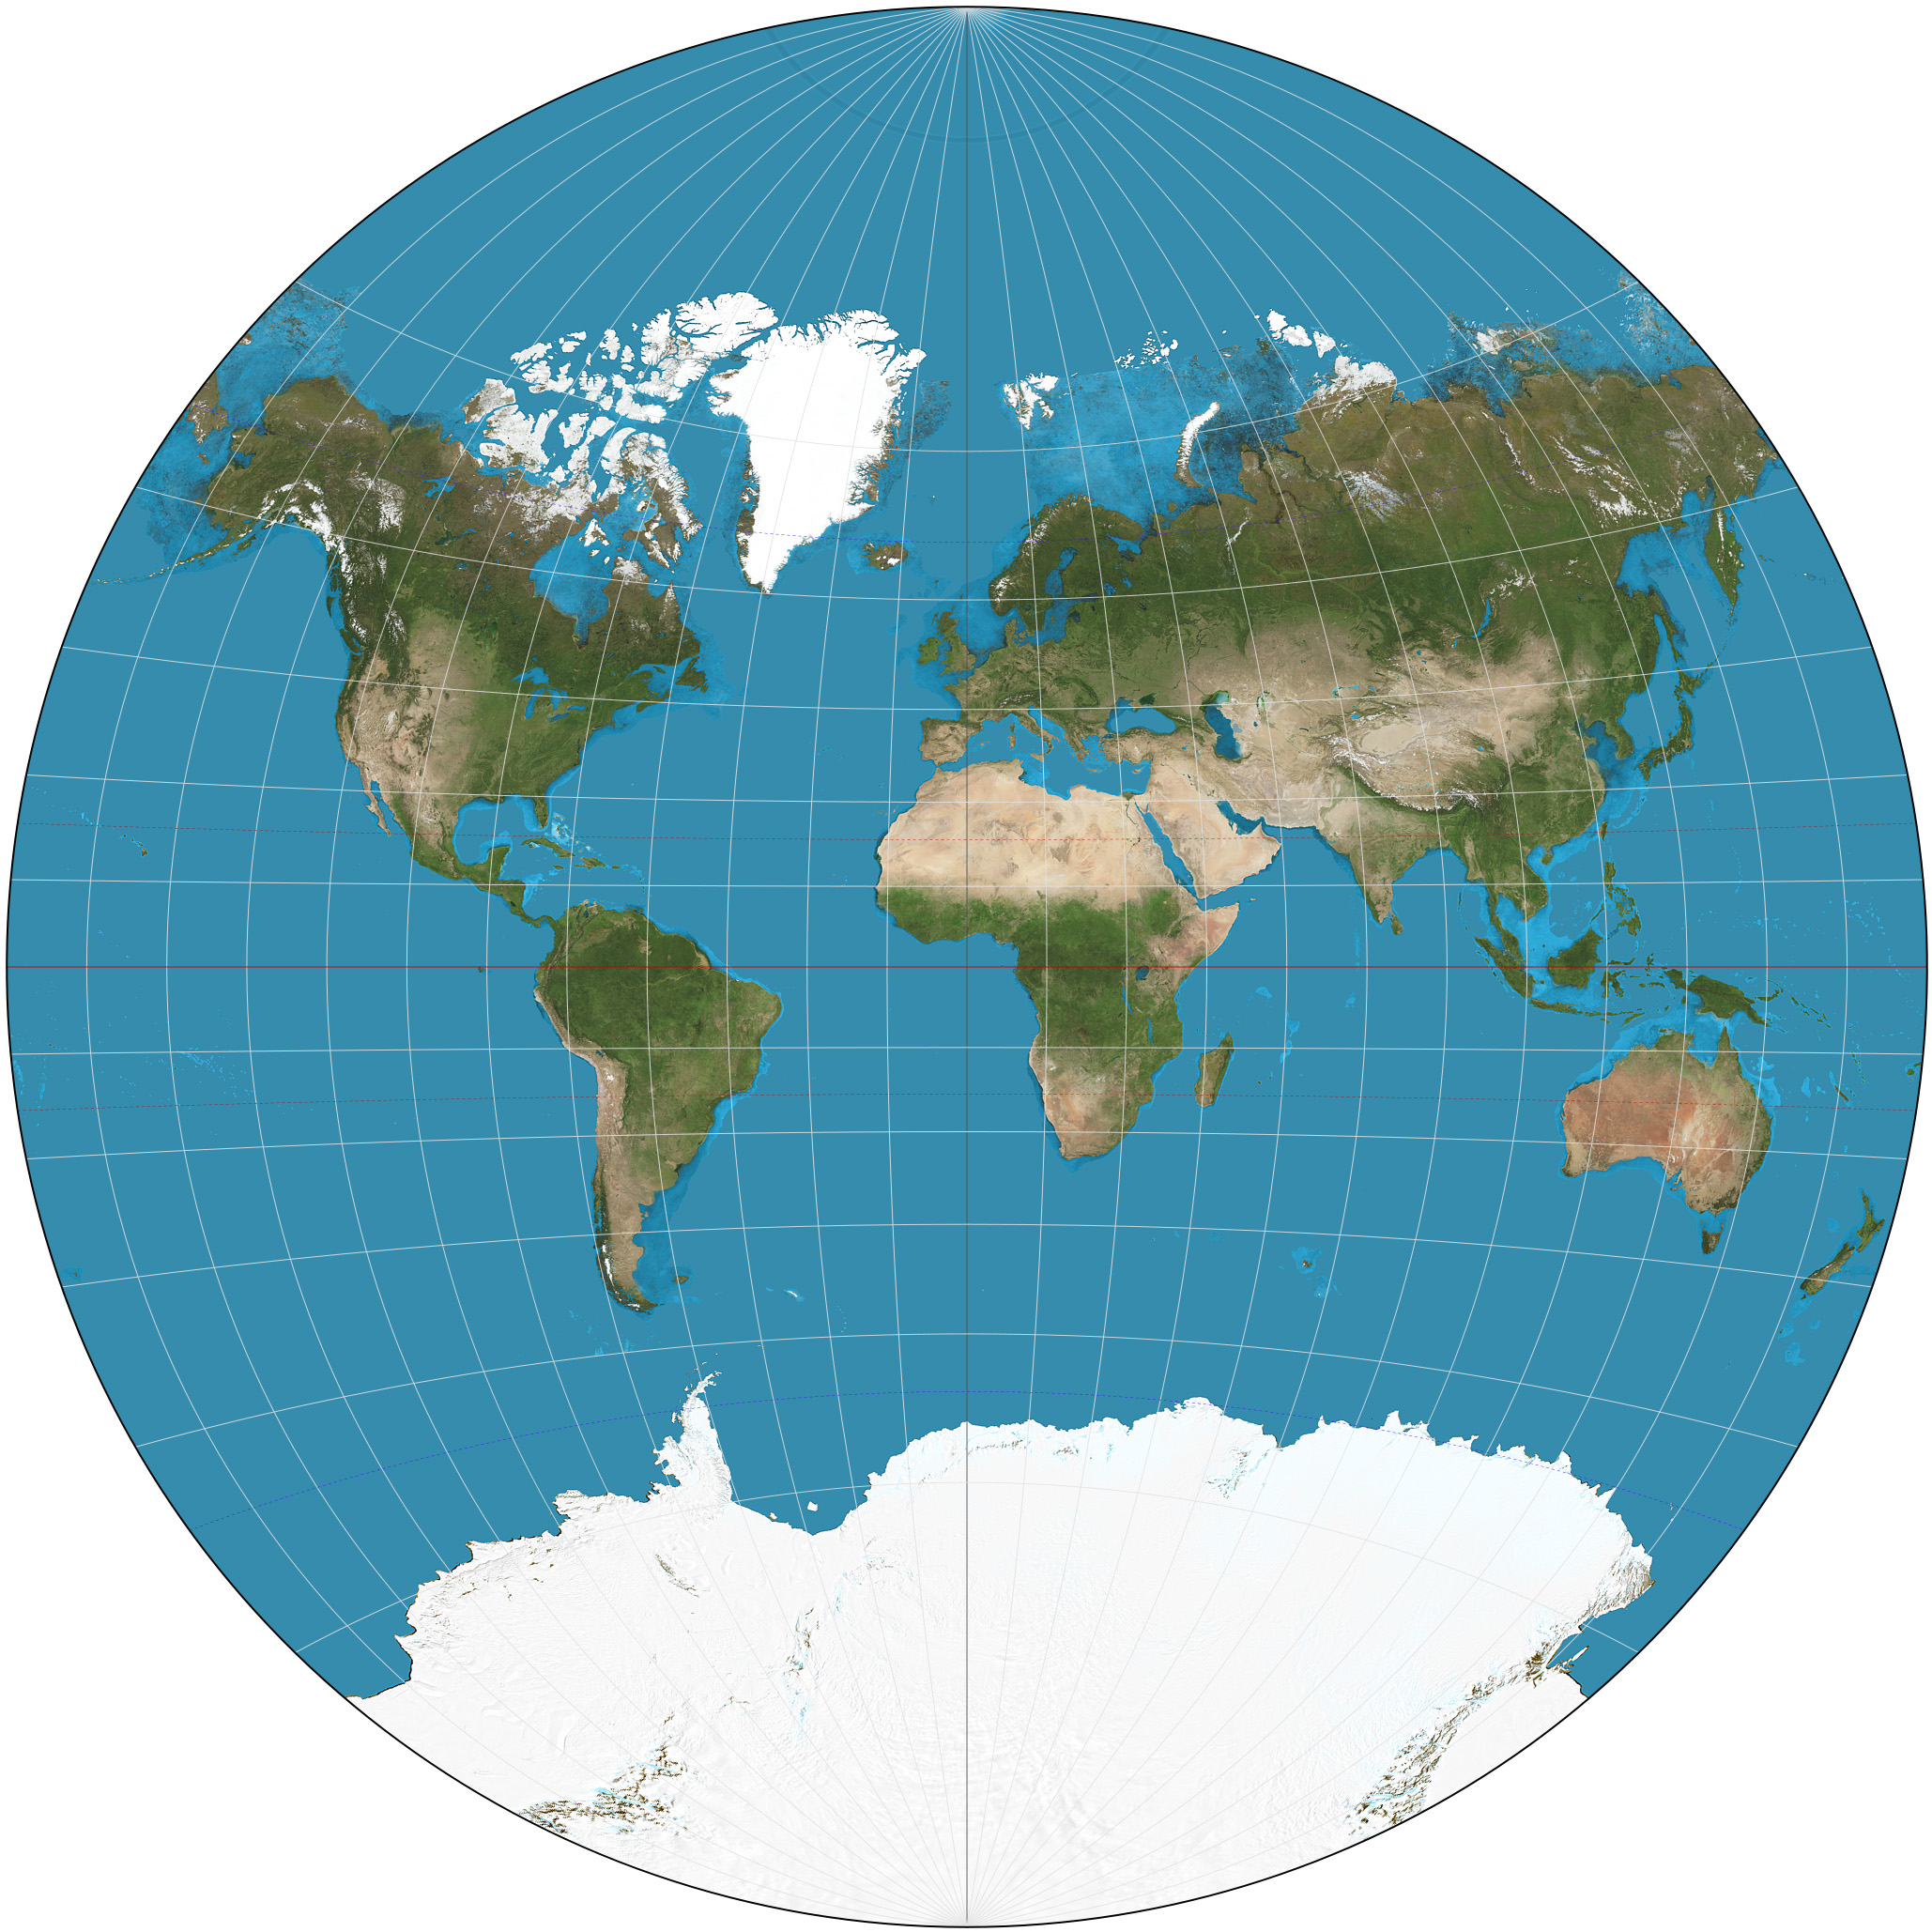 List of map projections